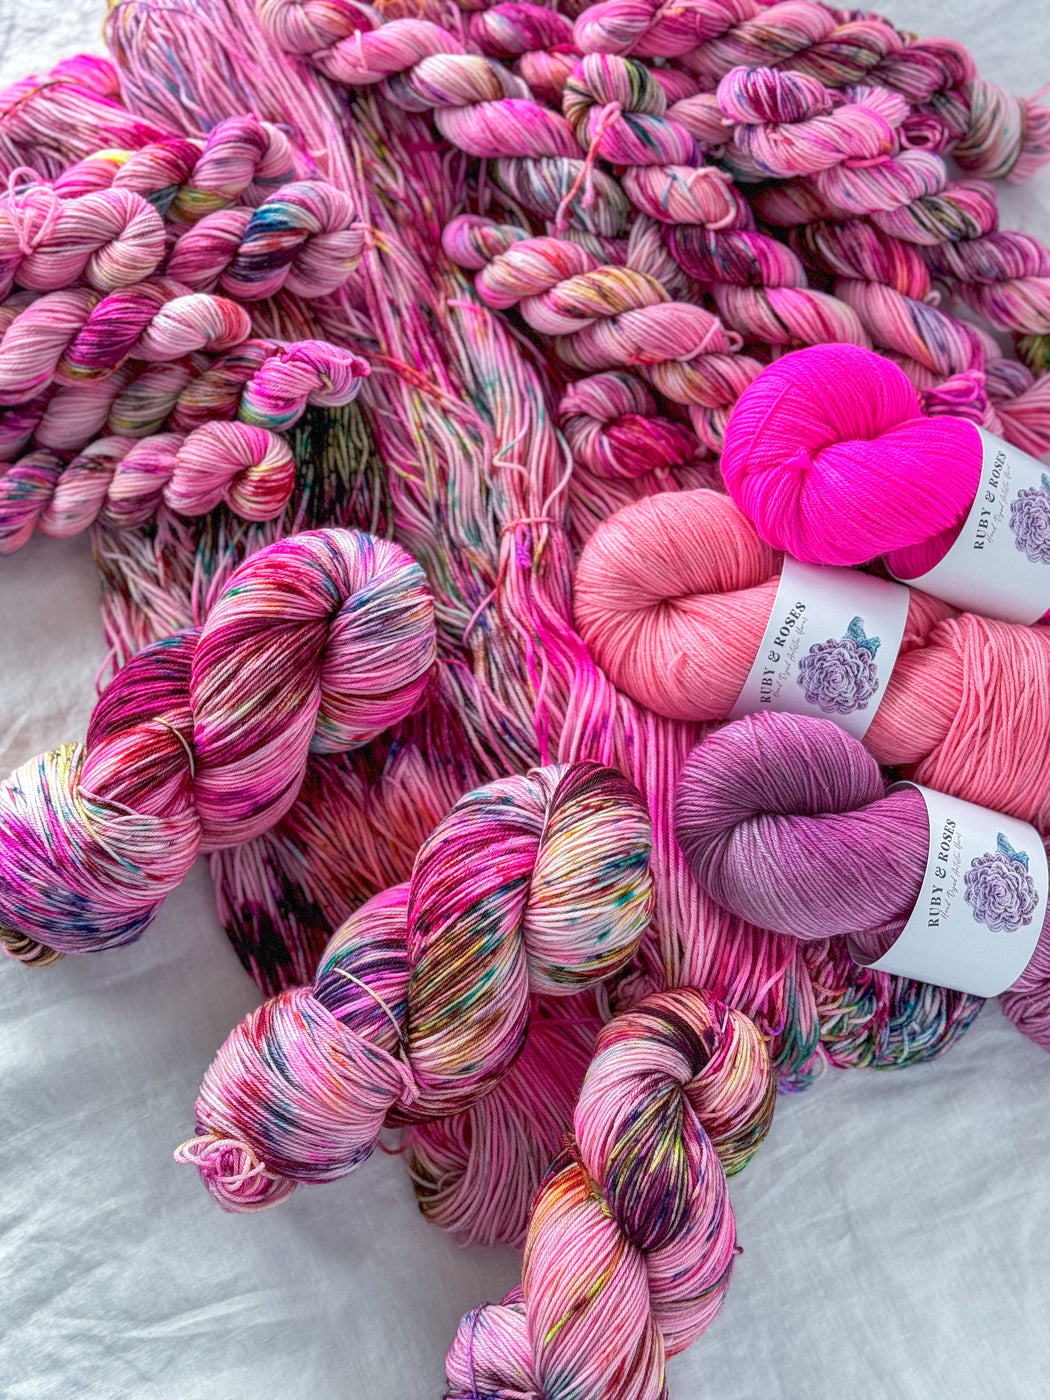 10g Mini /// OOAK April Colorway - Ruby and Roses Yarn - Hand Dyed Yarn